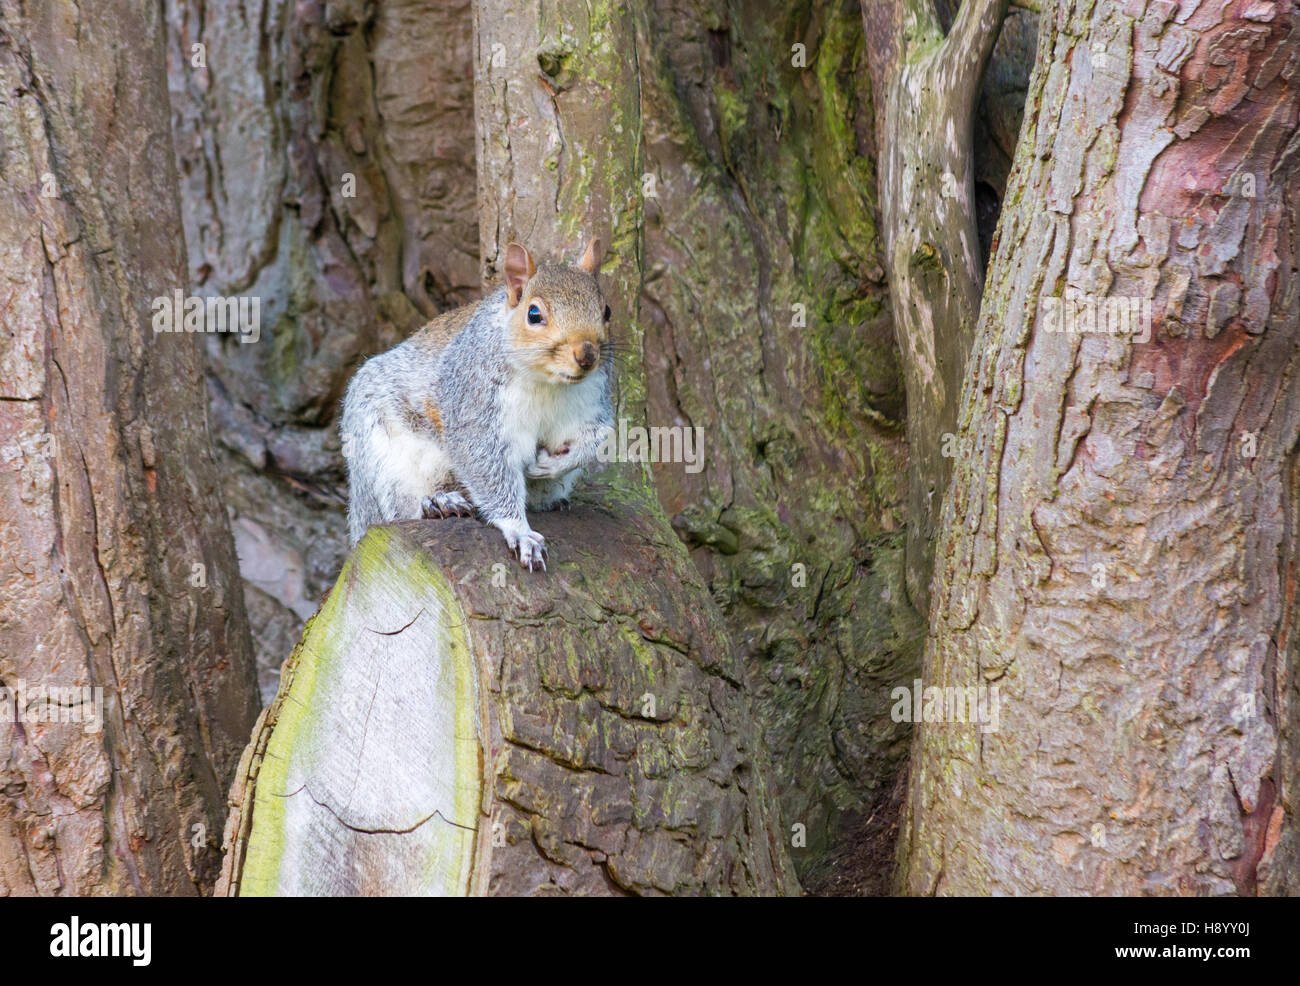 Keep a good hold on your nuts. Every squirrel's motto. Stock Photo